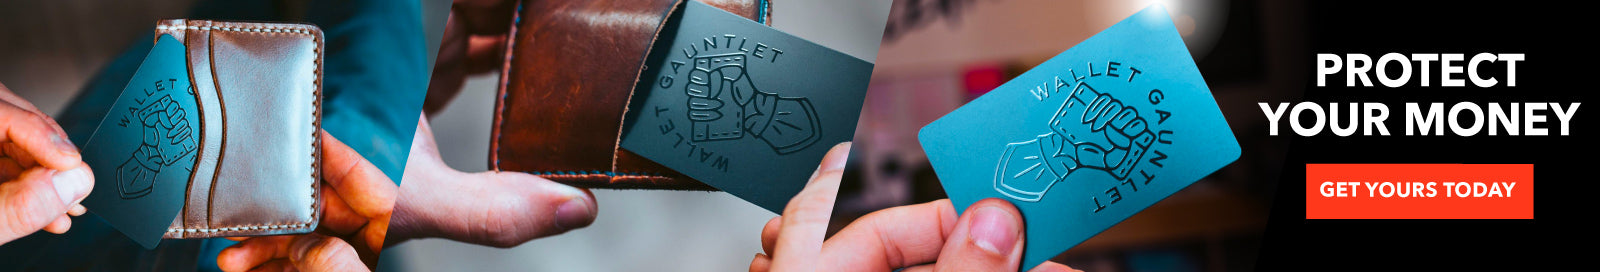 RFID Blocking Cards: Protect your cards against skimming